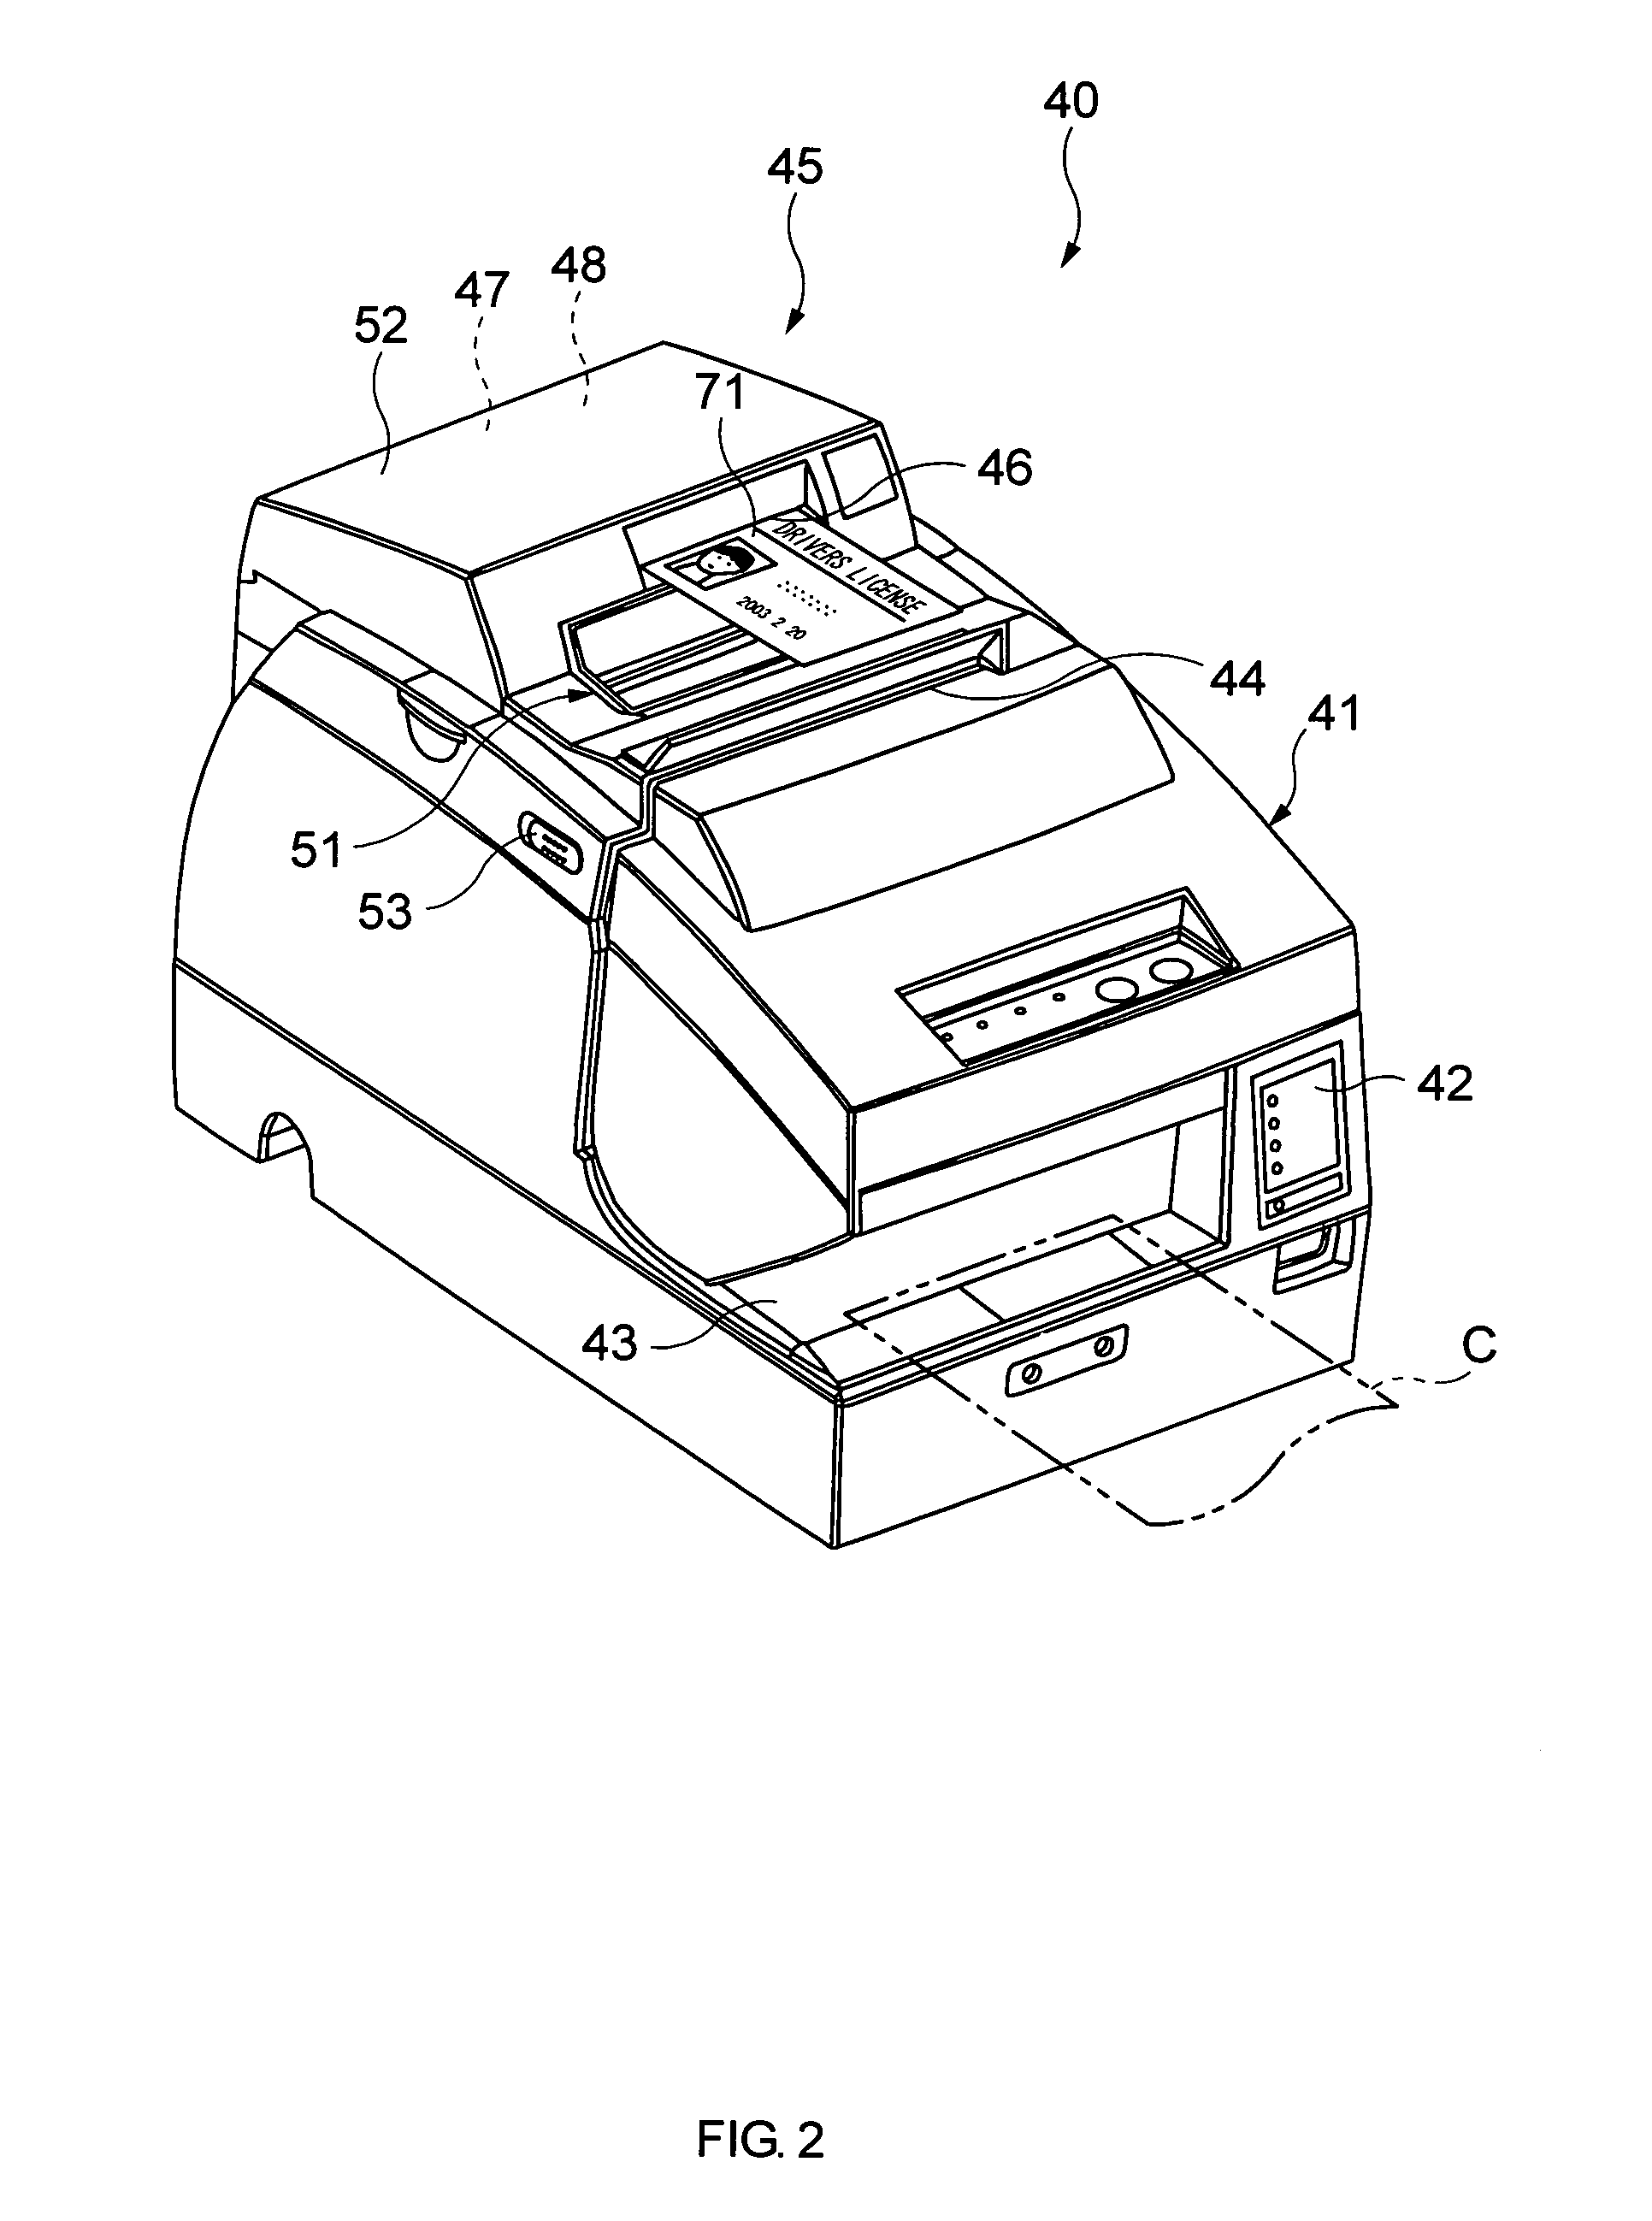 Check processing apparatus, POS system and method for processing checks when processing transactions using a POS terminal computer